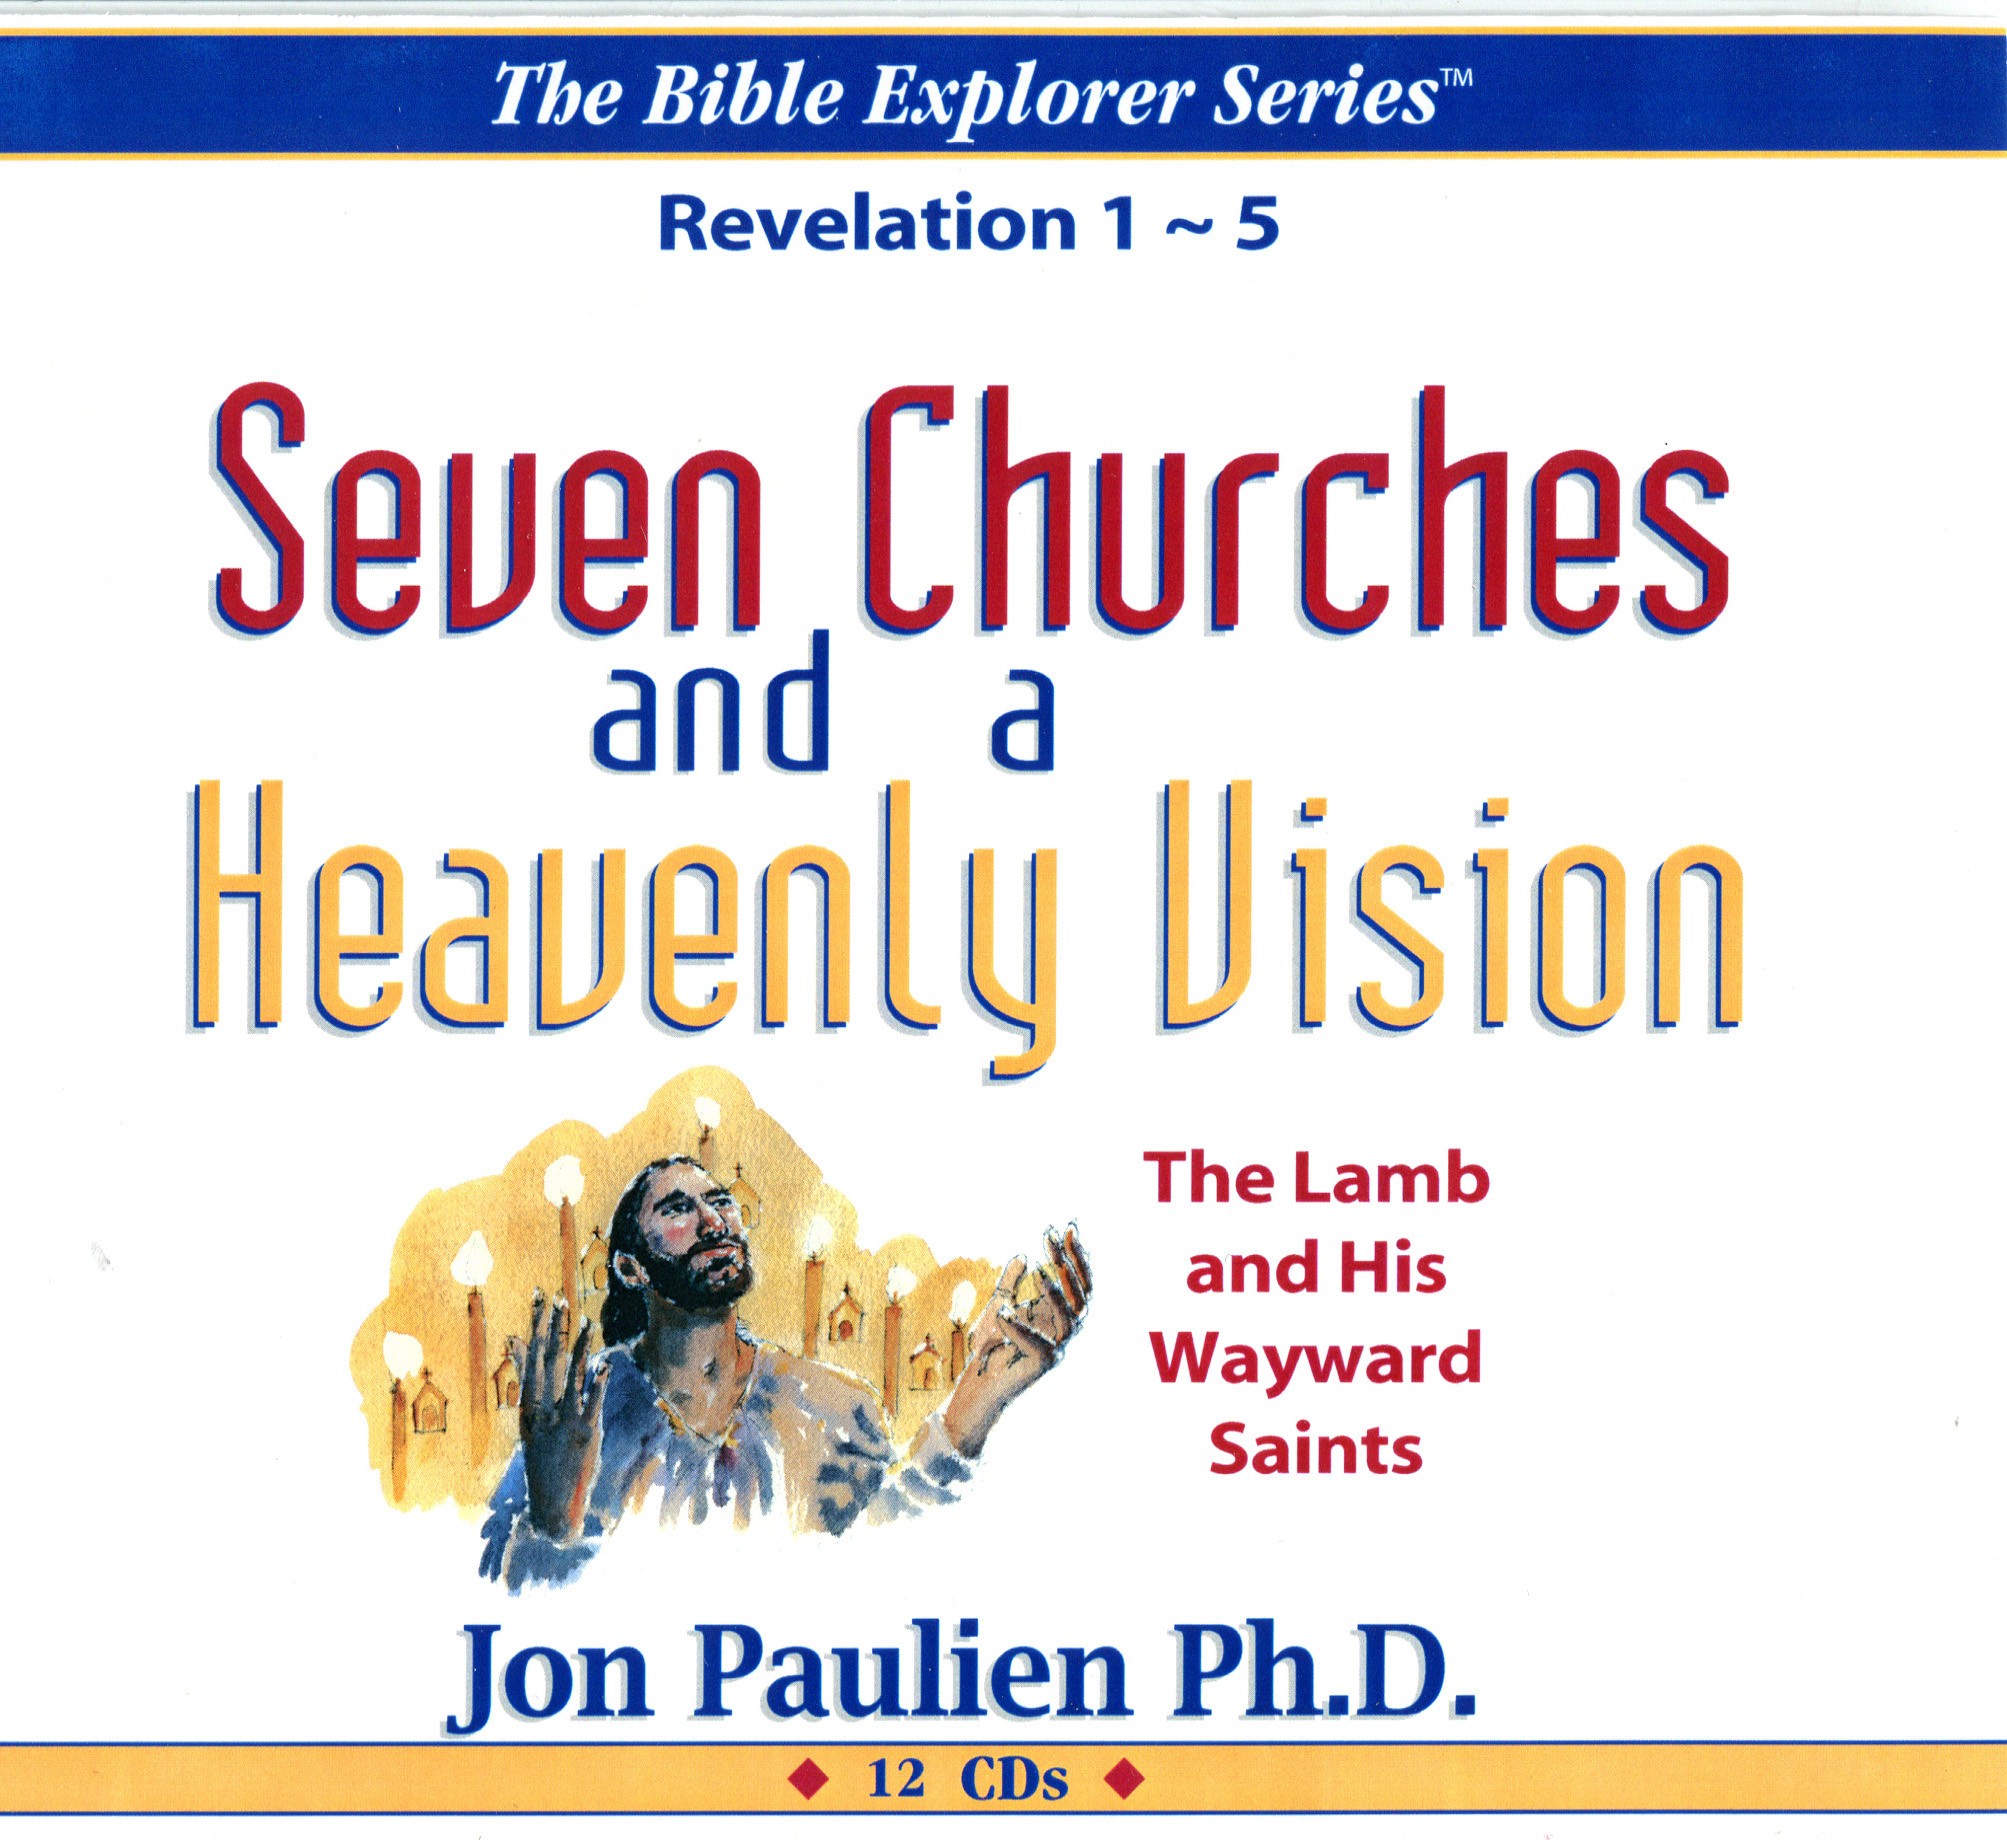 mp3 DOWNLOAD >> REVELATION 1 - 5 >> Seven Churches And A Heavenly Vision >> The Lamb And His Wayward Saints